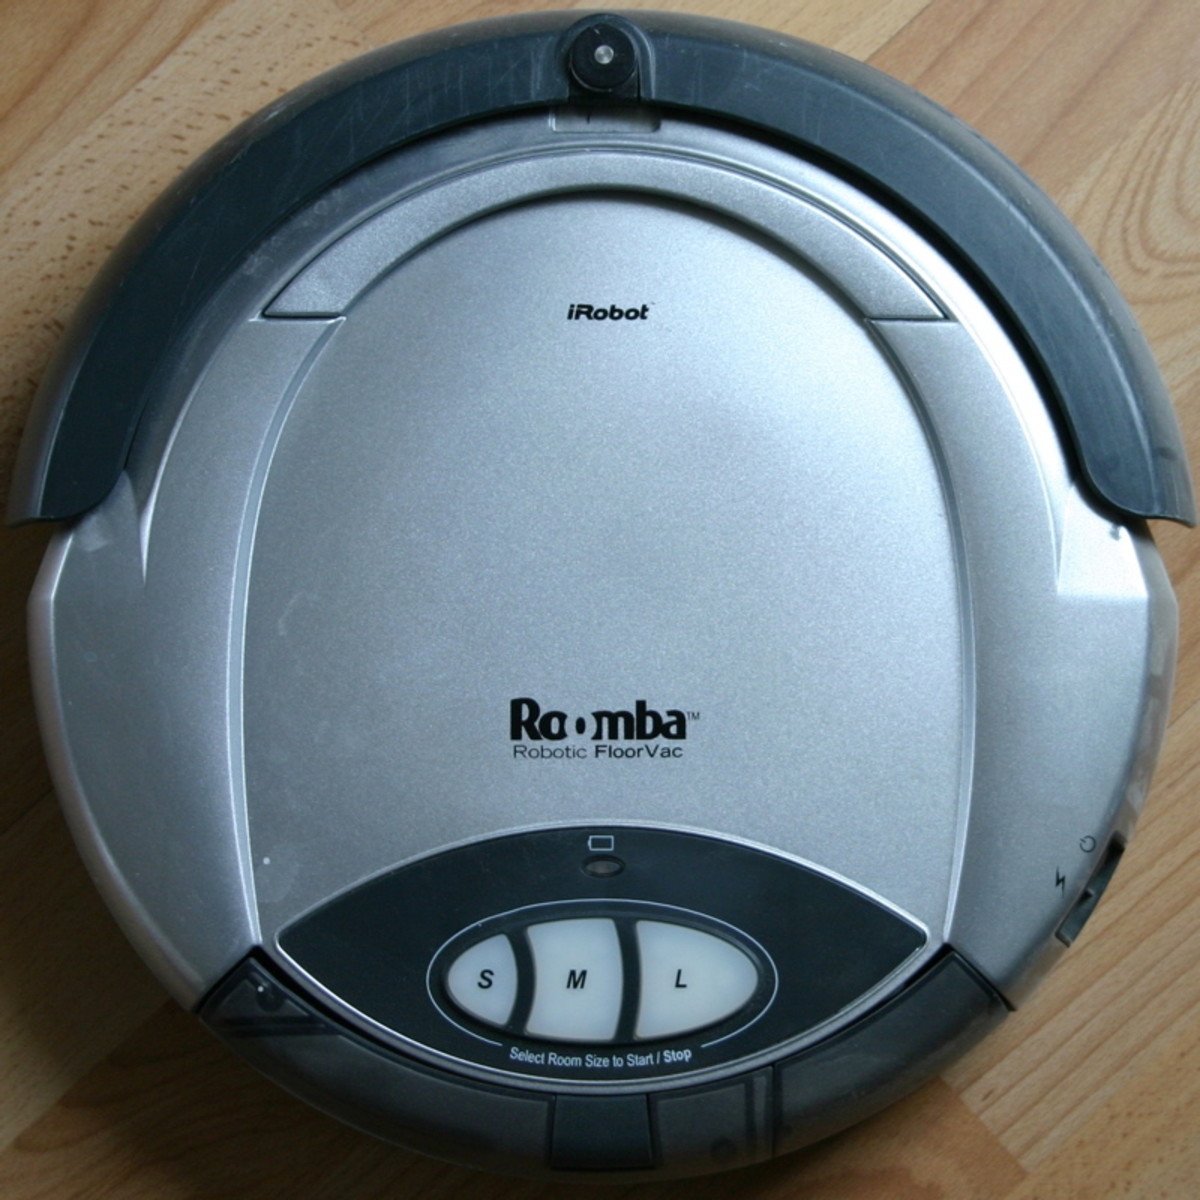 How to Fix a Roomba's Bin Full Light That Won't Turn Off